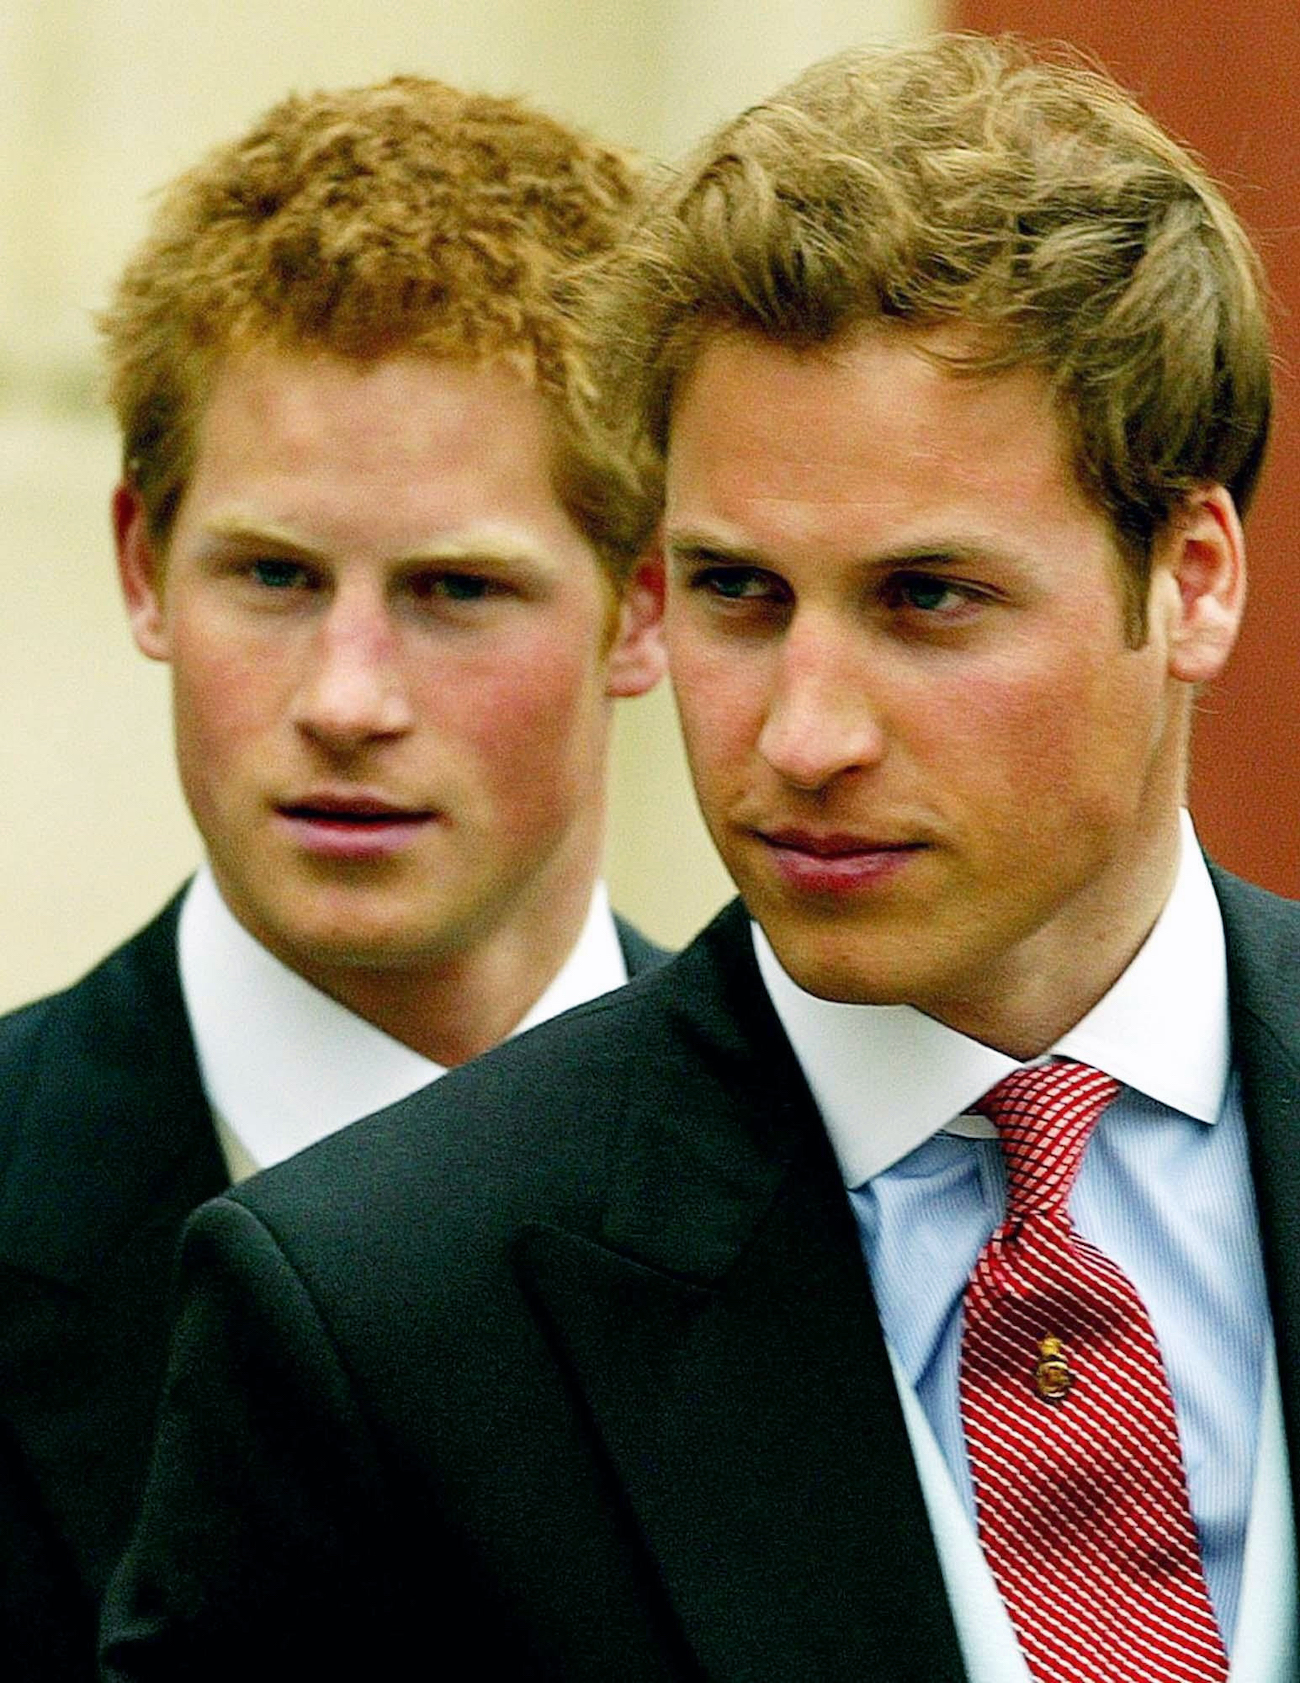 Prince William and Prince Harry after the wedding of Prince Charles and Camilla Parker Bowles